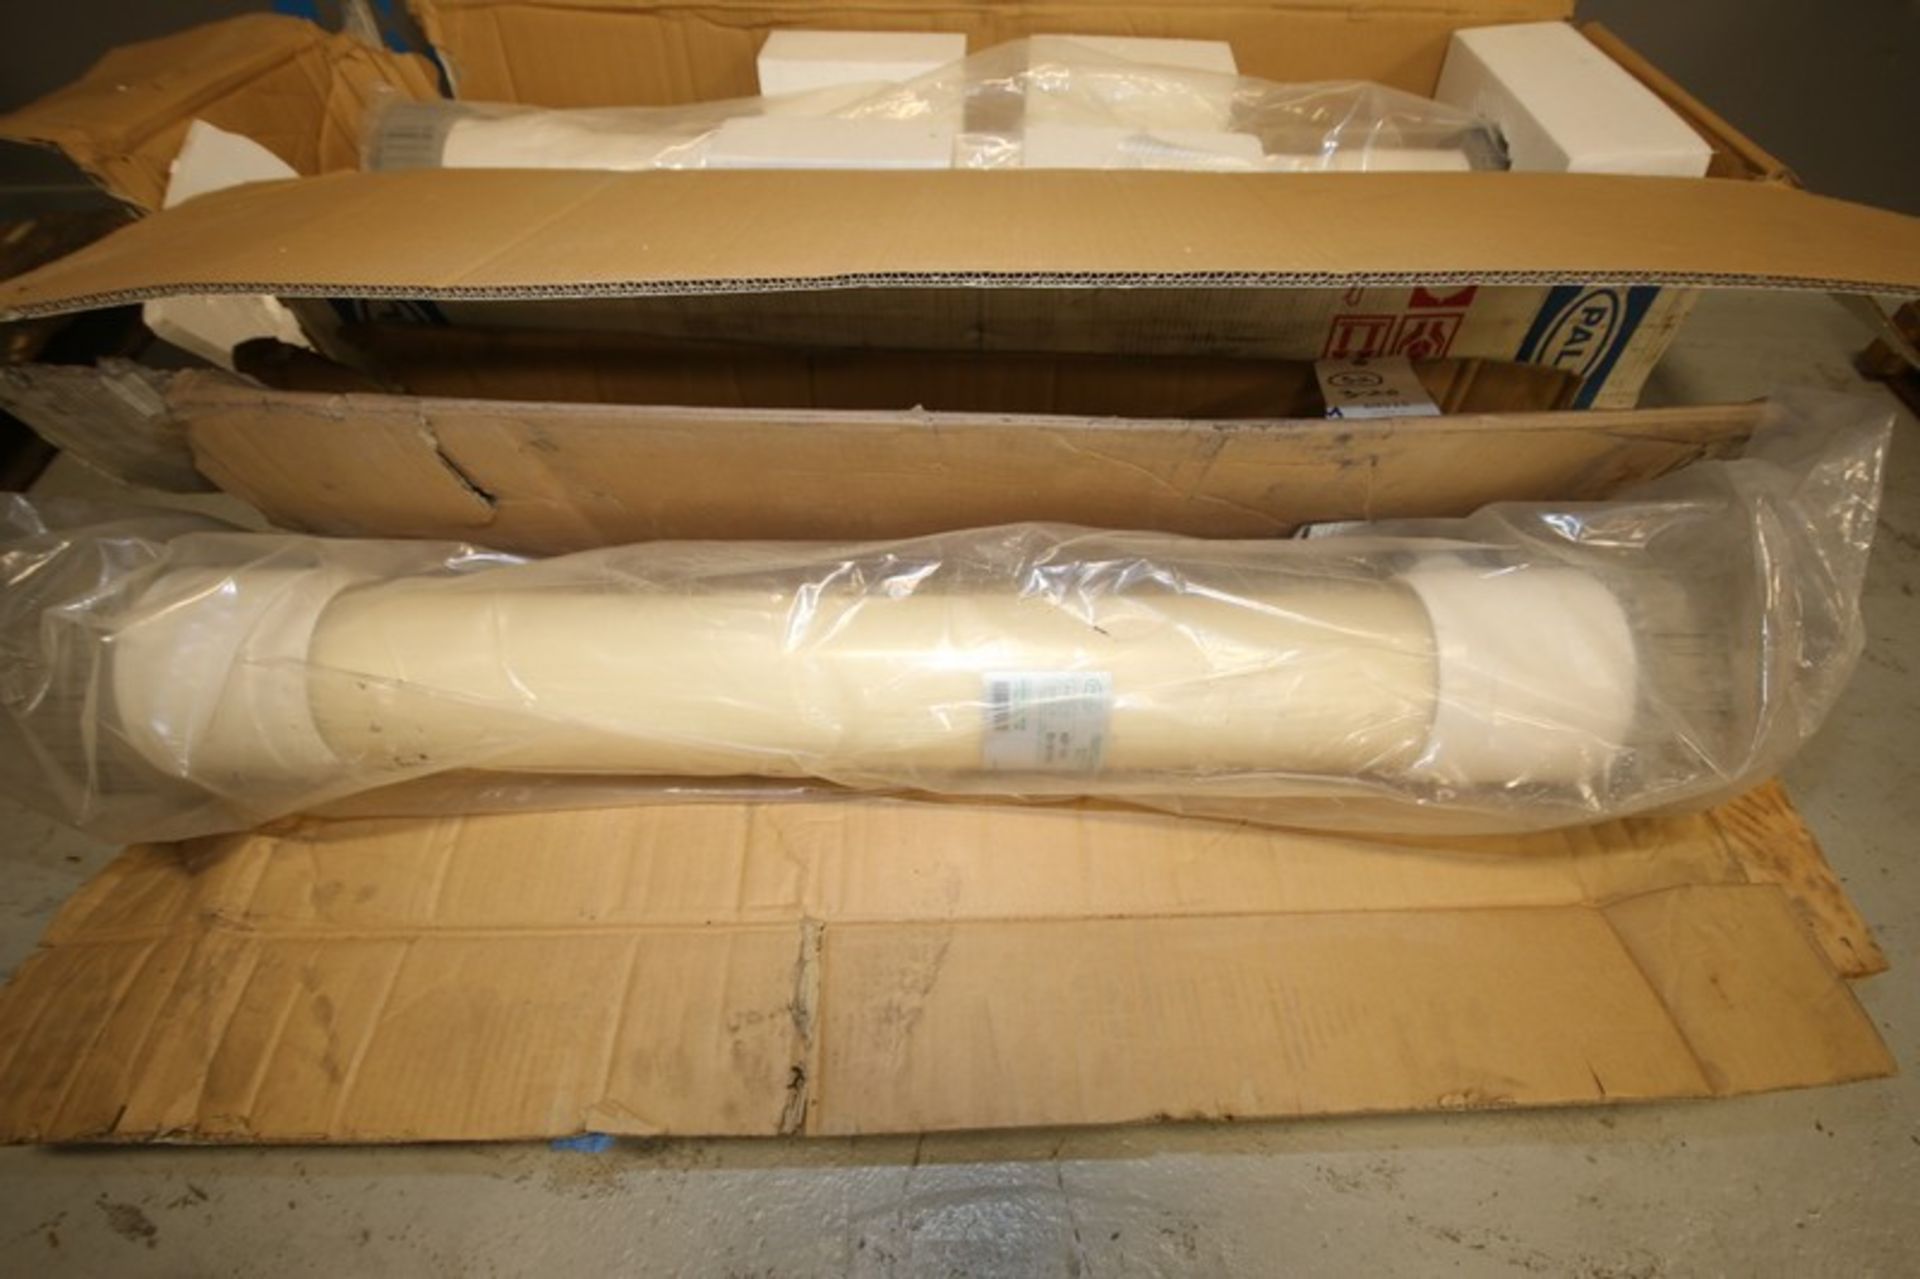 Lot of (2) Pall Microza Membranes,Part No. UMW-553 & WSP-543, 44" L with 3.5" Clamp Type - Image 2 of 3